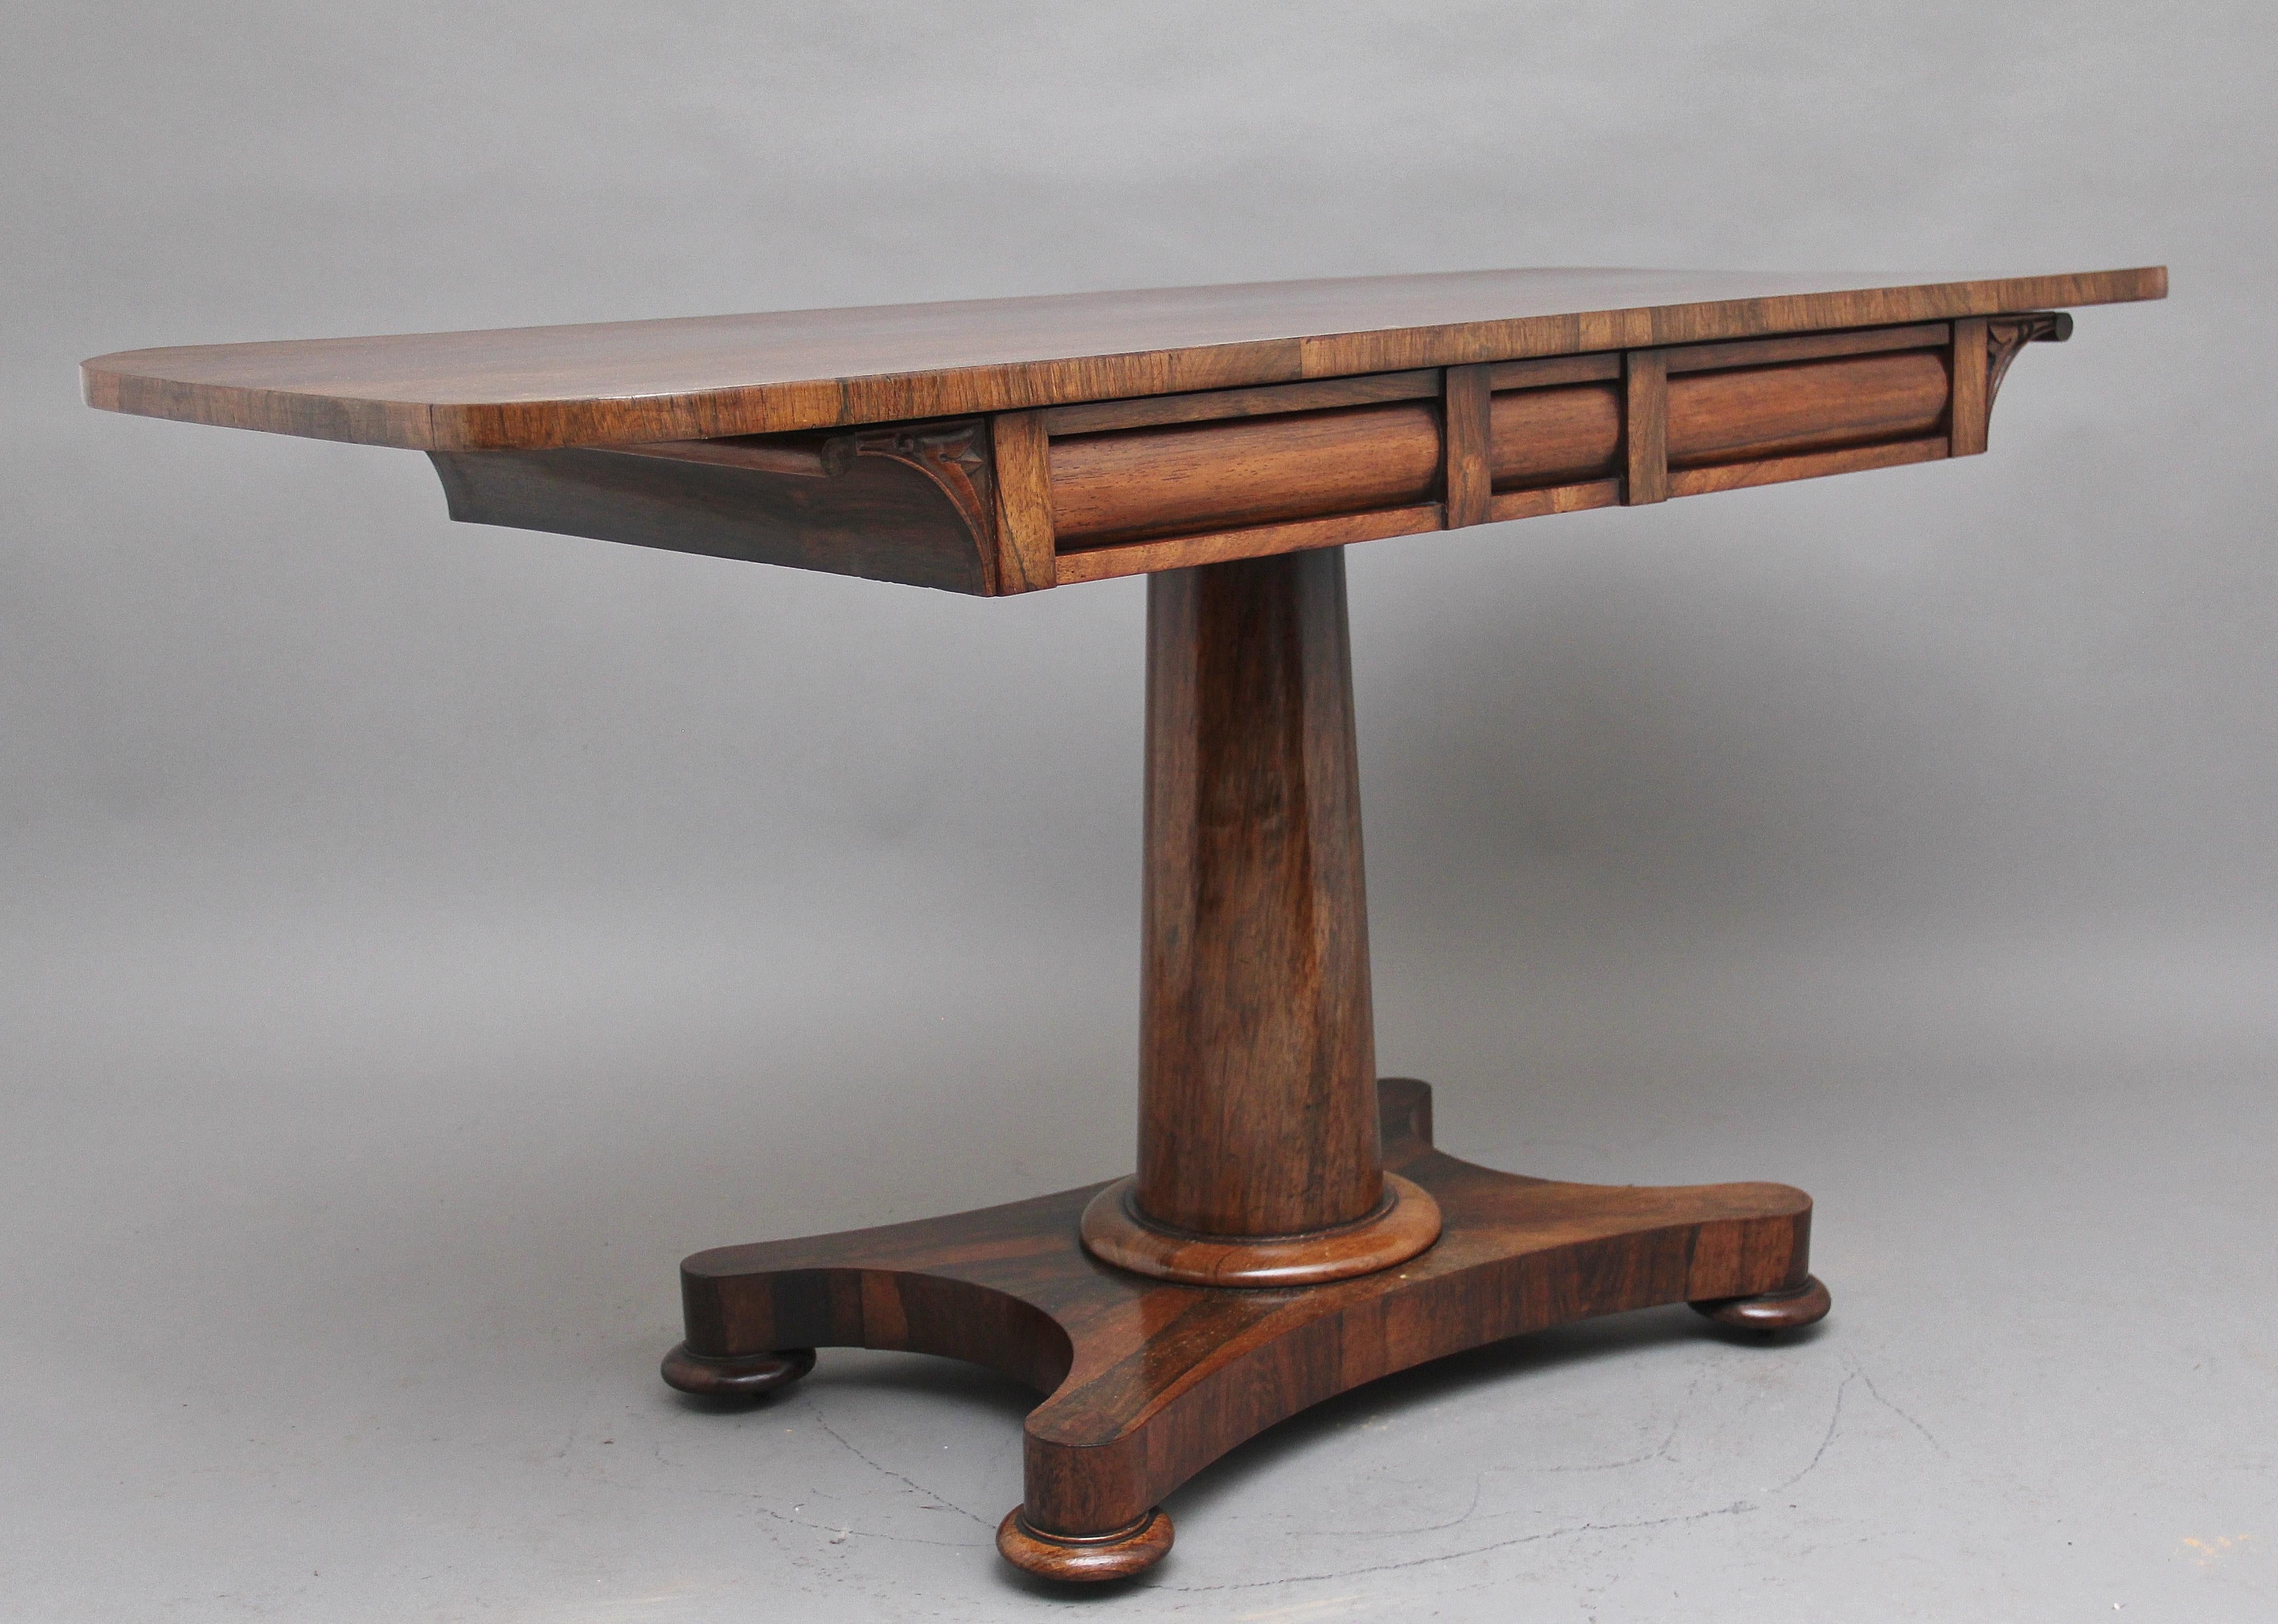 Early 19th century rosewood sofa / library table, having a lovely figured top of rectangular shape with rounded corners above two oak lined frieze drawers, supported on a turned column on a shaped quatrefoil platform base raised on bun feet, circa